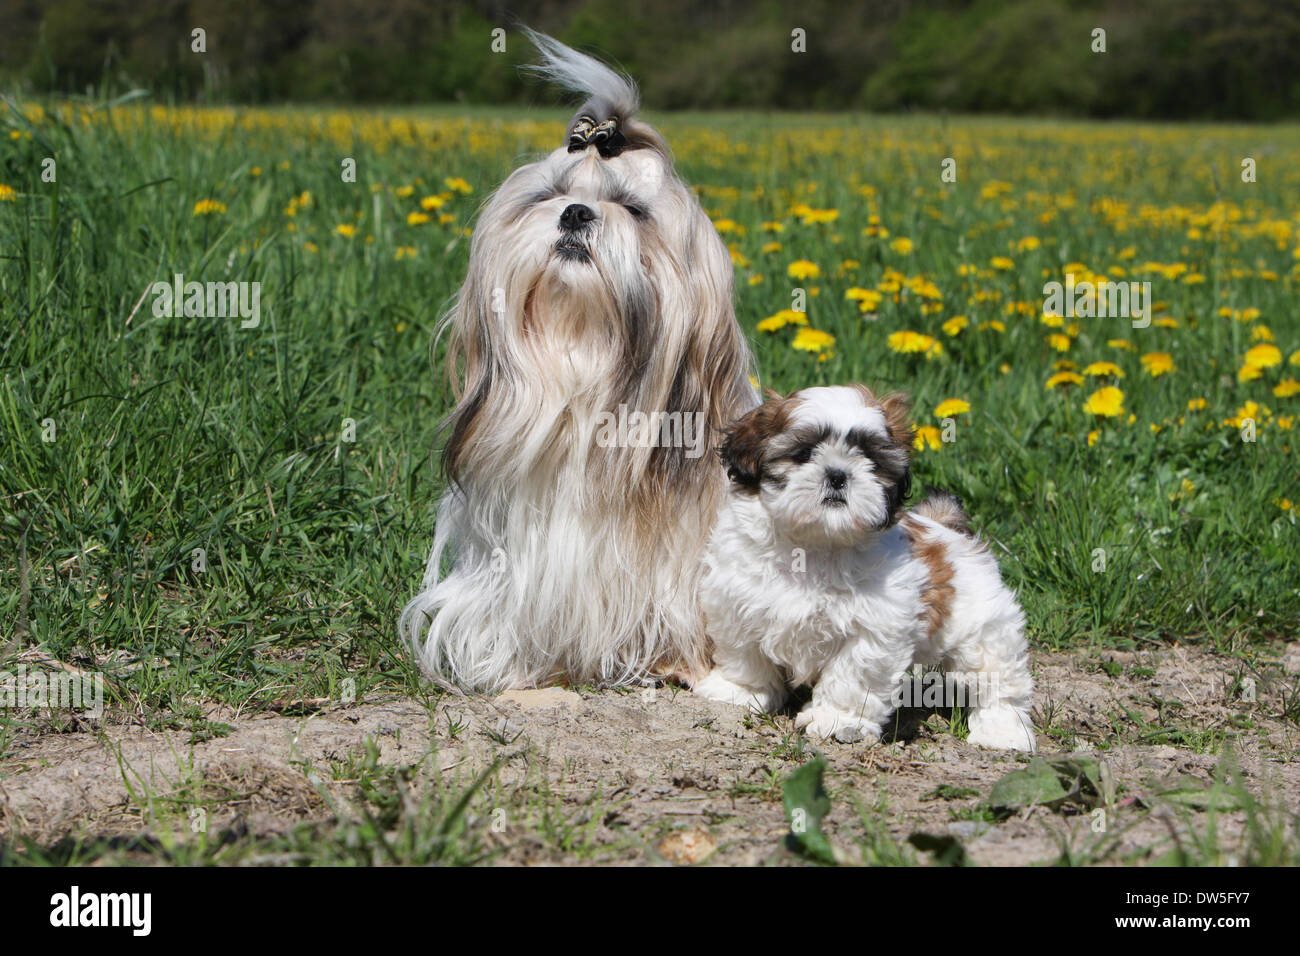 Shih Tzu Dogs  Breed, History and Health Overview